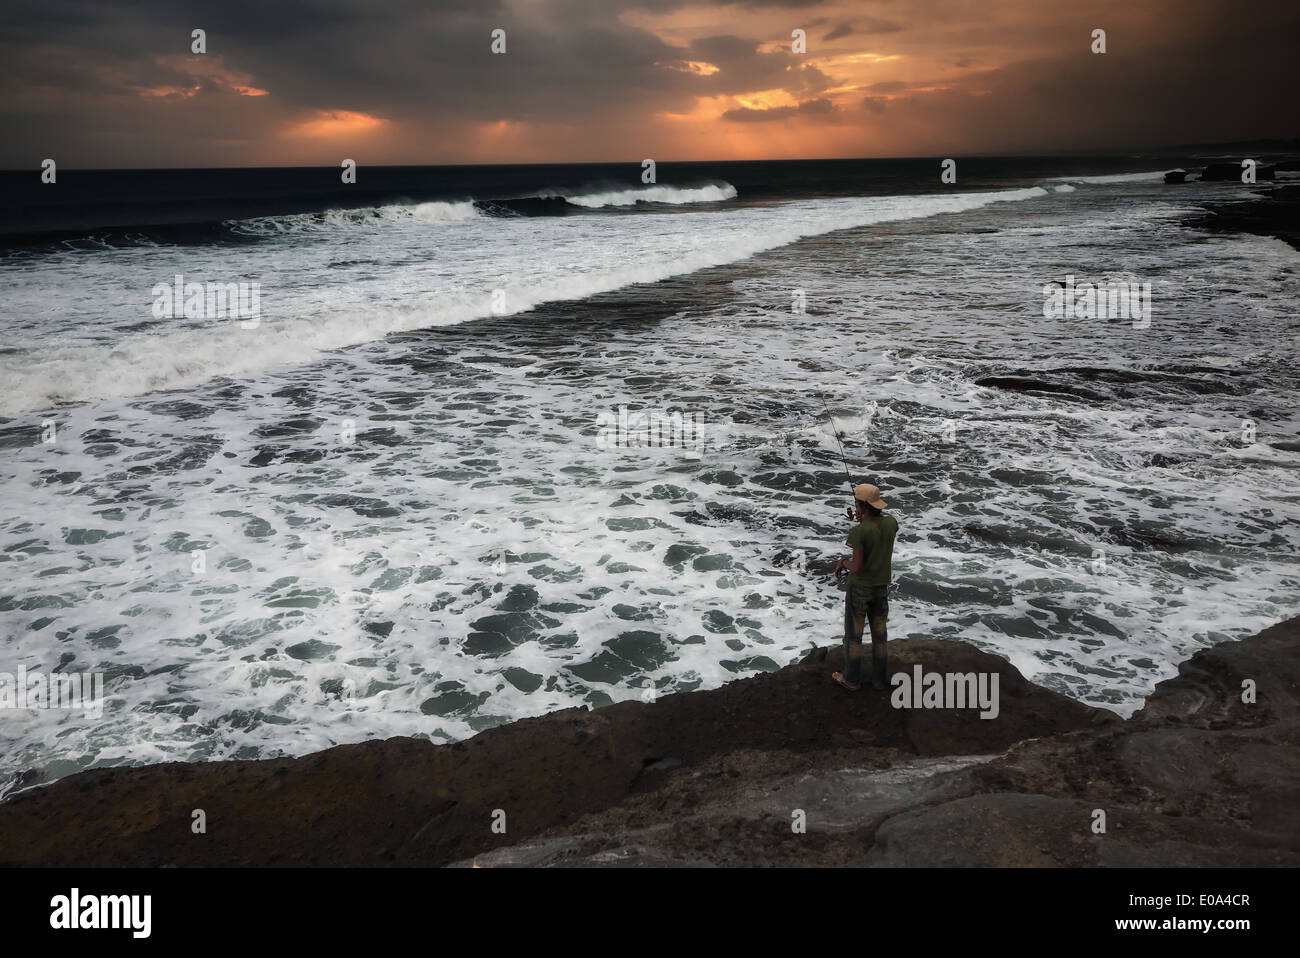 A Balinese man fishing on a cliff Stock Photo